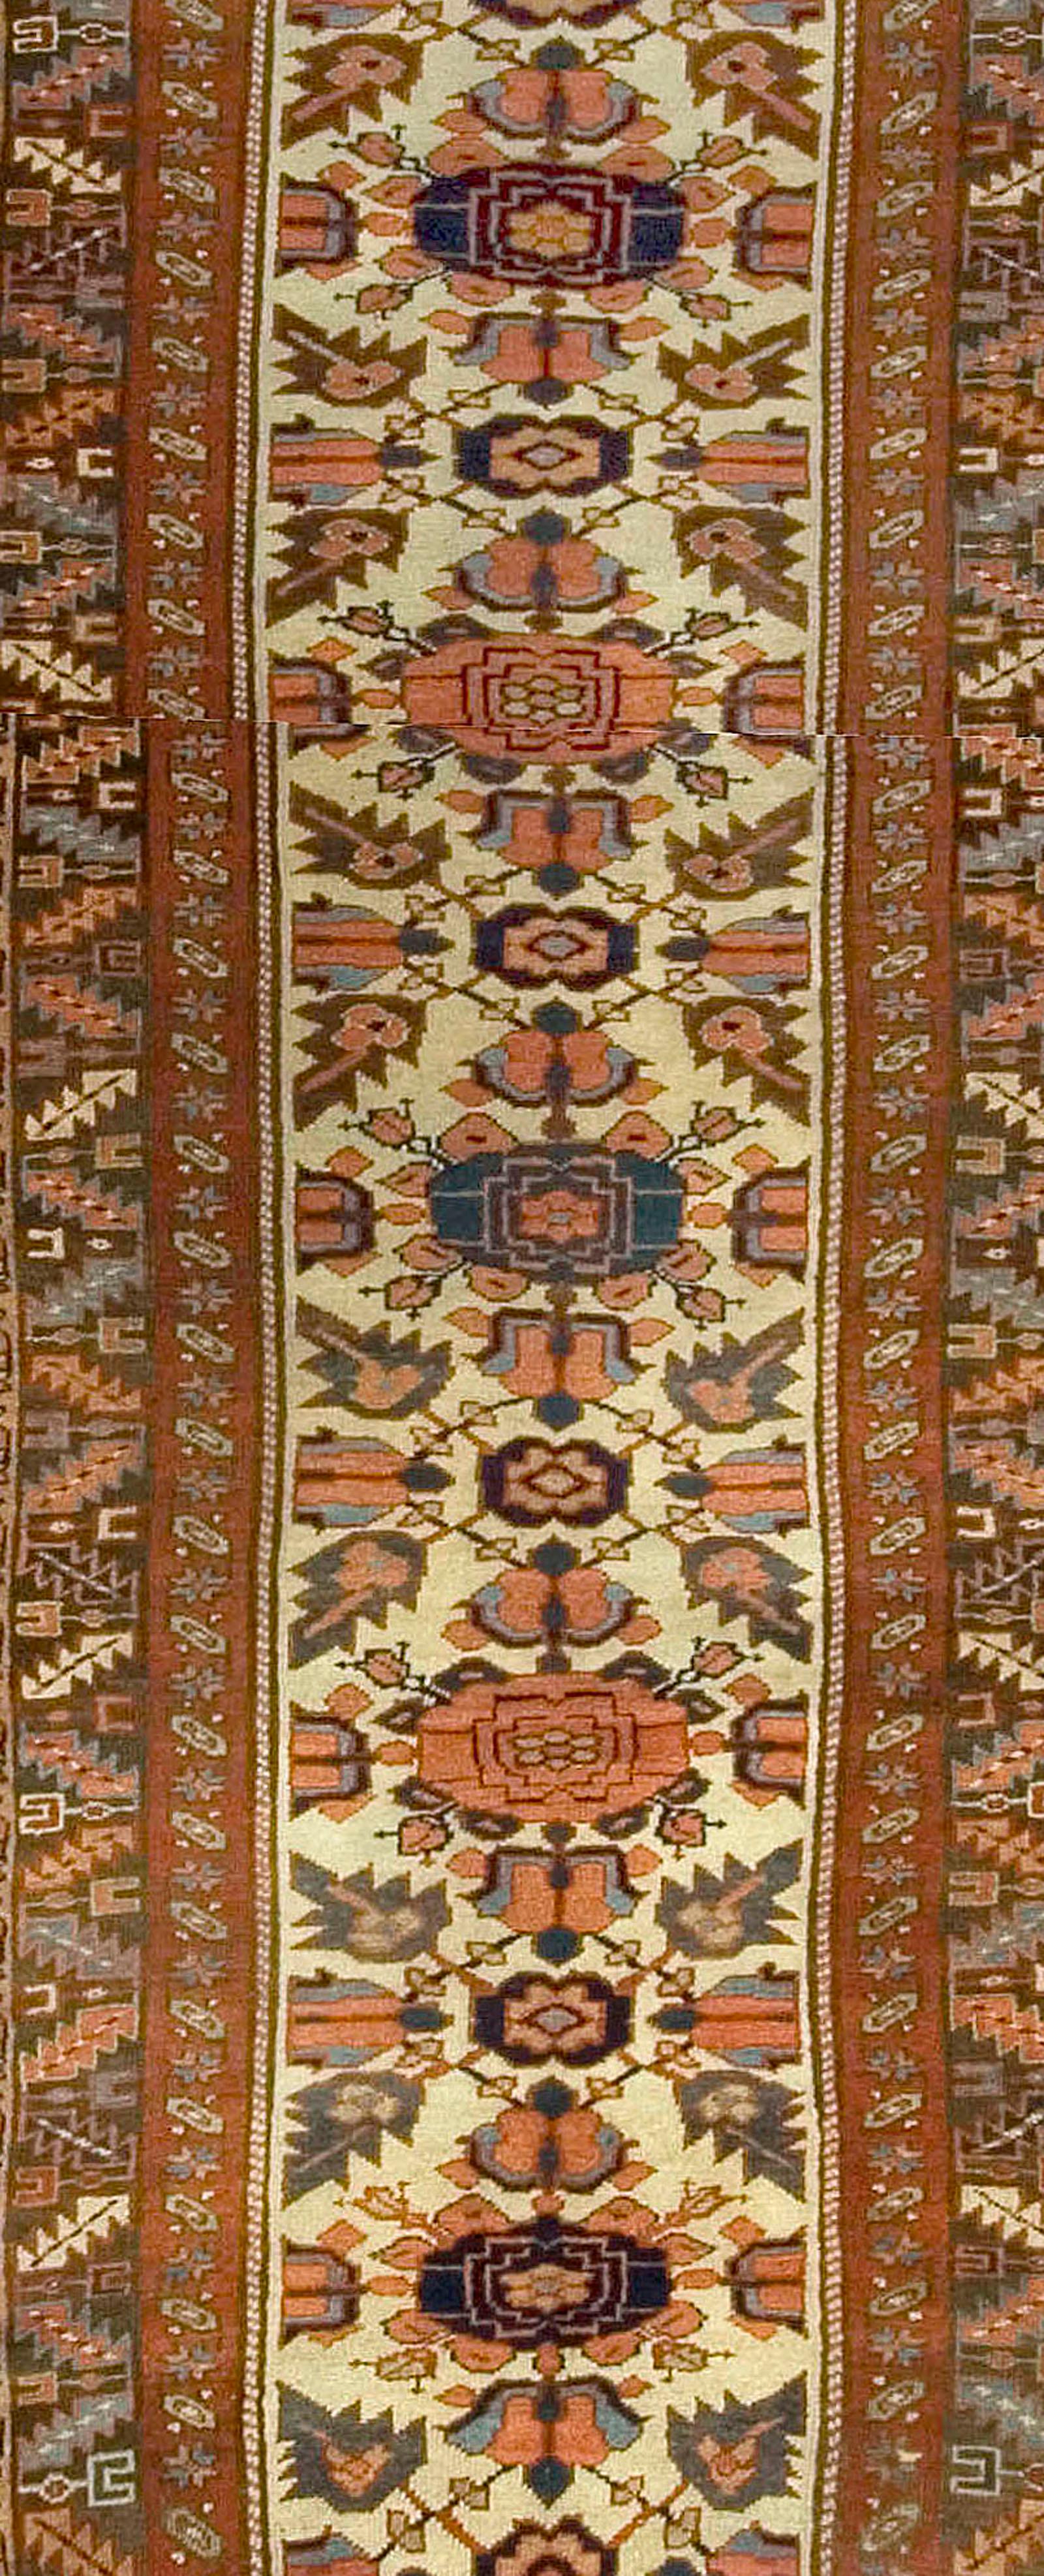 Antique Kurdish runner. A pleasant floral pattern woven in bright colors plays over the ivory central field. A border containing four rows of geometric floral and vine-scroll patterns woven in browns blues violets and reds completes the overall